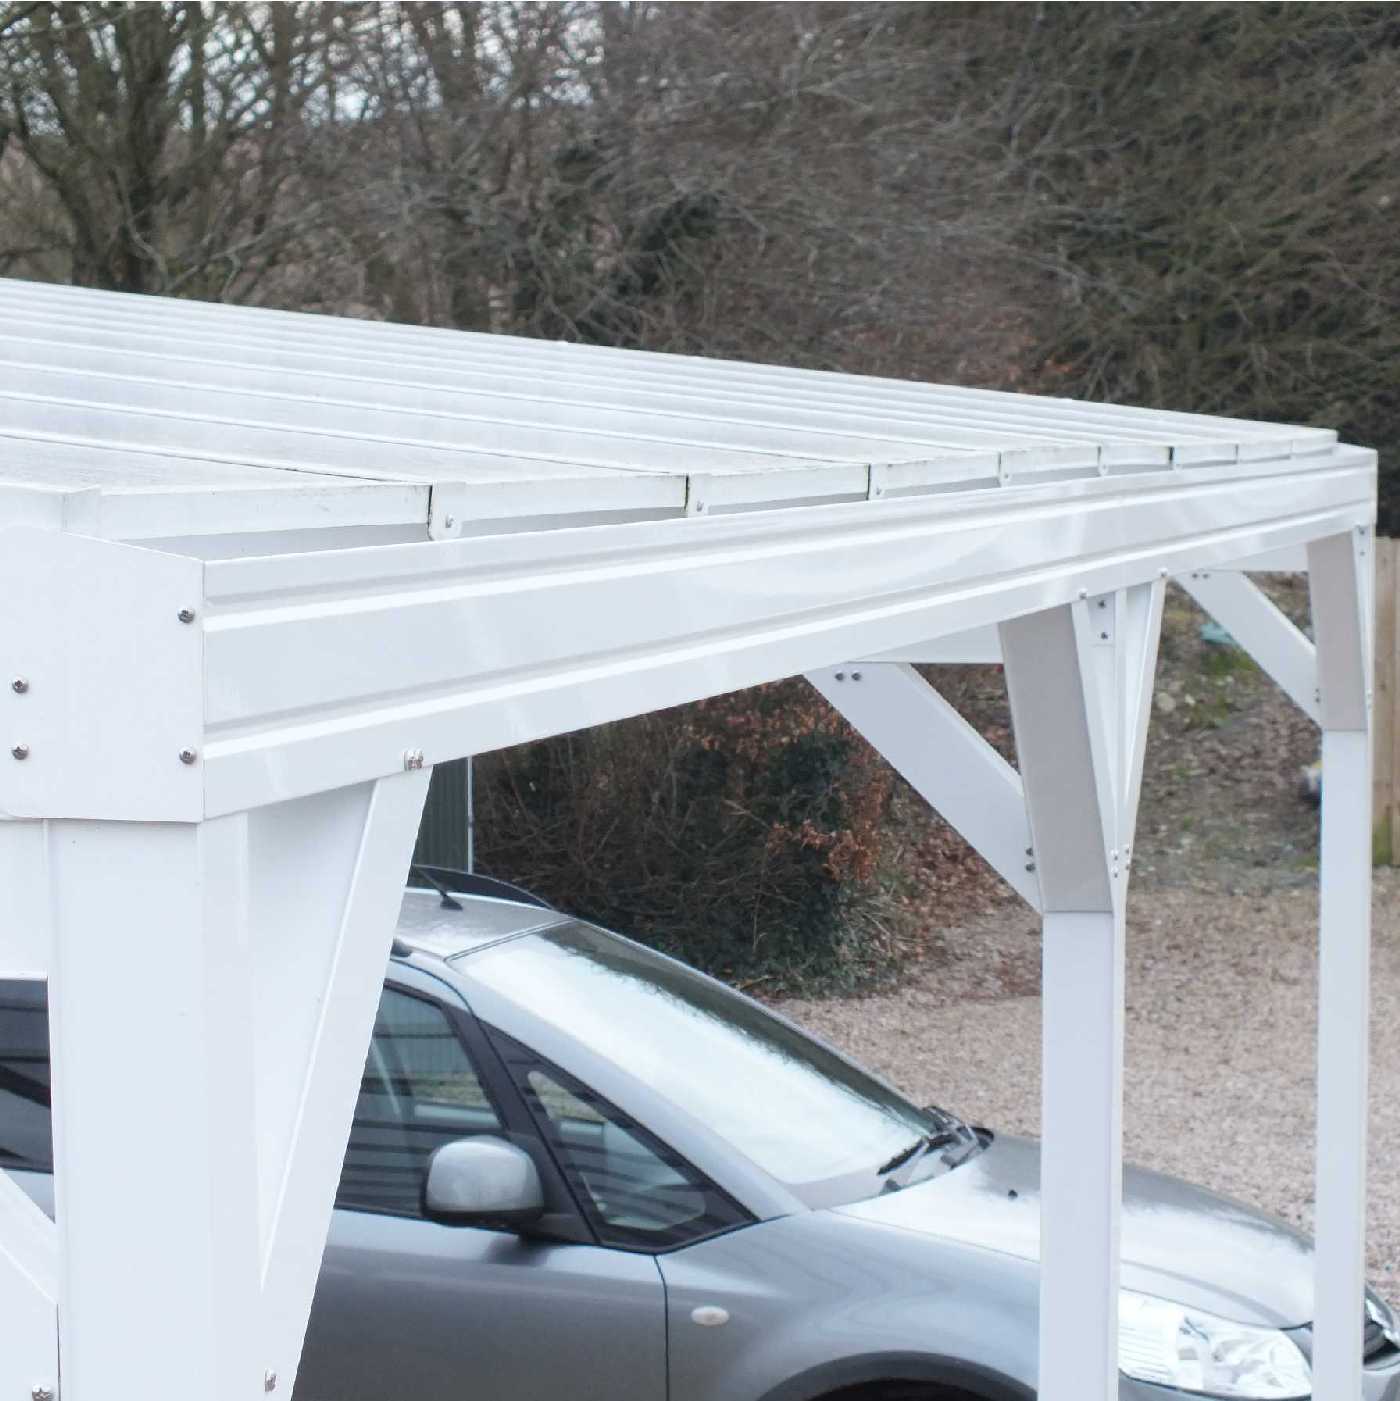 Omega Smart Free-Standing, White MonoPitch Roof Canopy with 16mm Polycarbonate Glazing - 7.8m (W) x 3.5m (P), (8) Supporting Posts from Omega Build